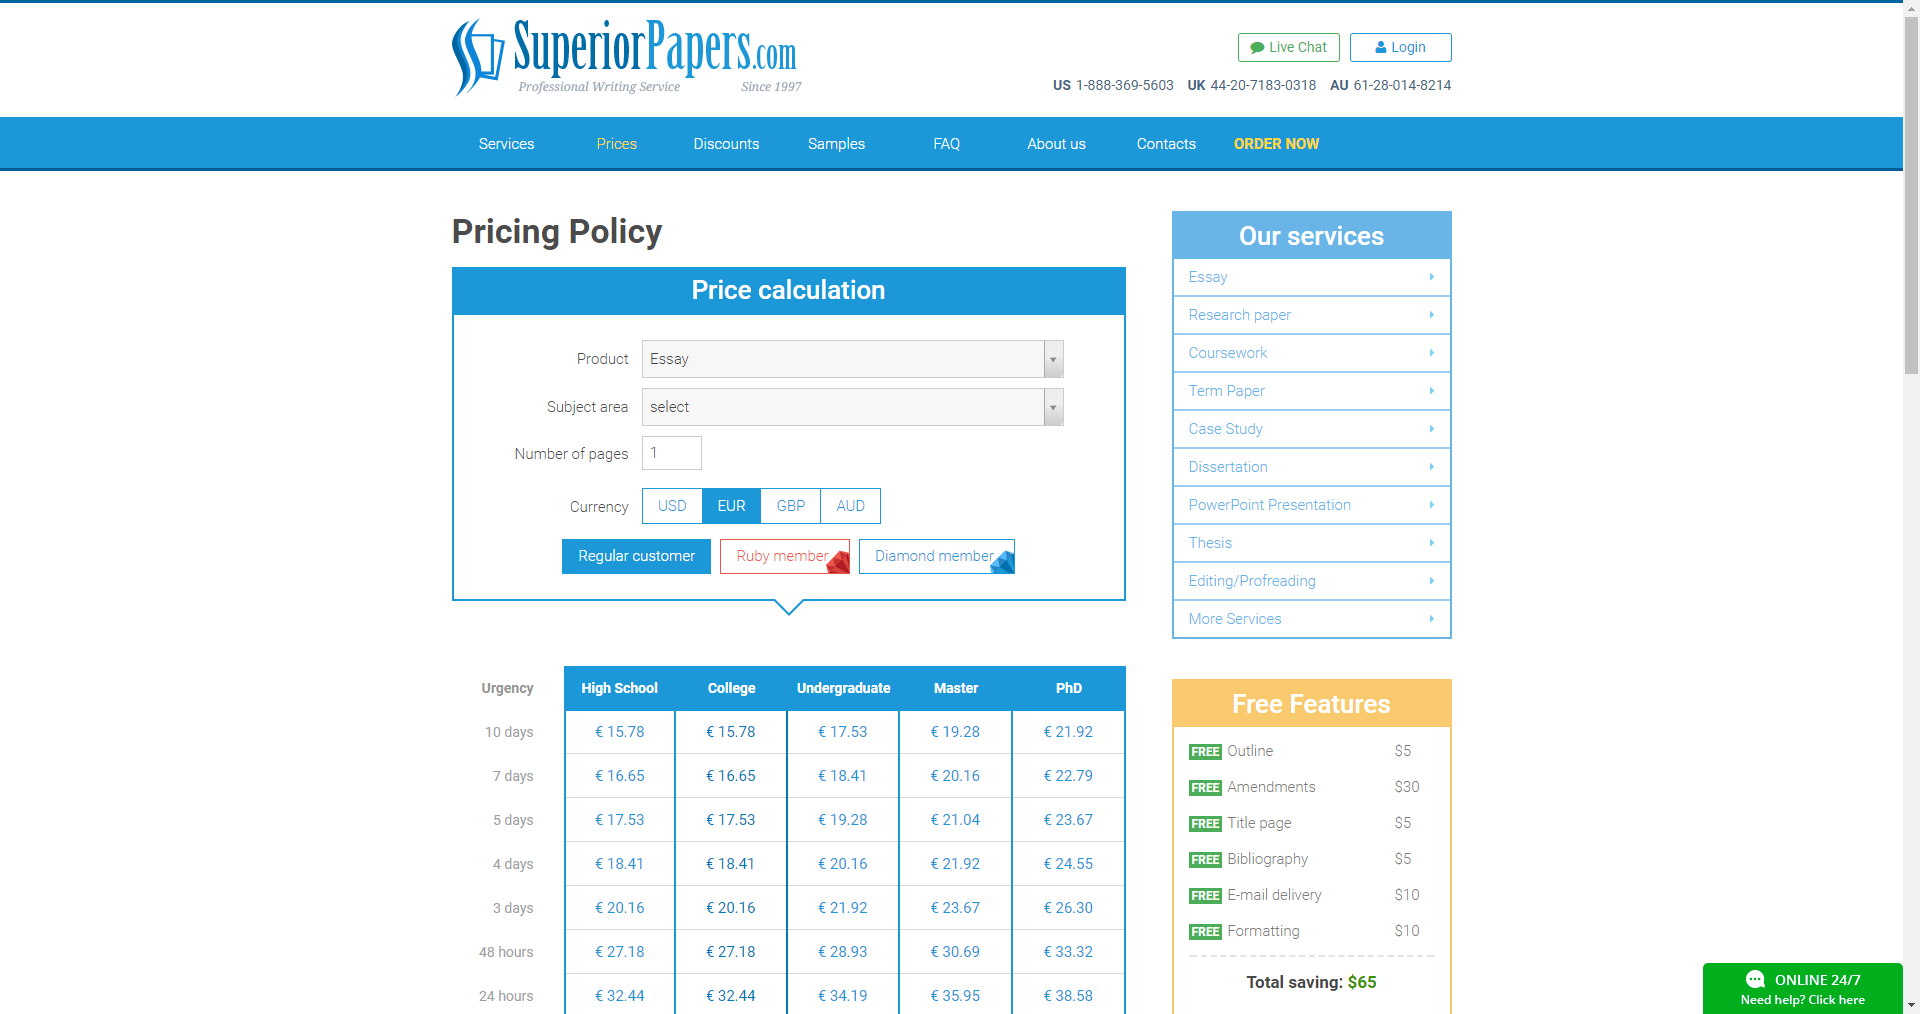 Superiorpapers Price Policy